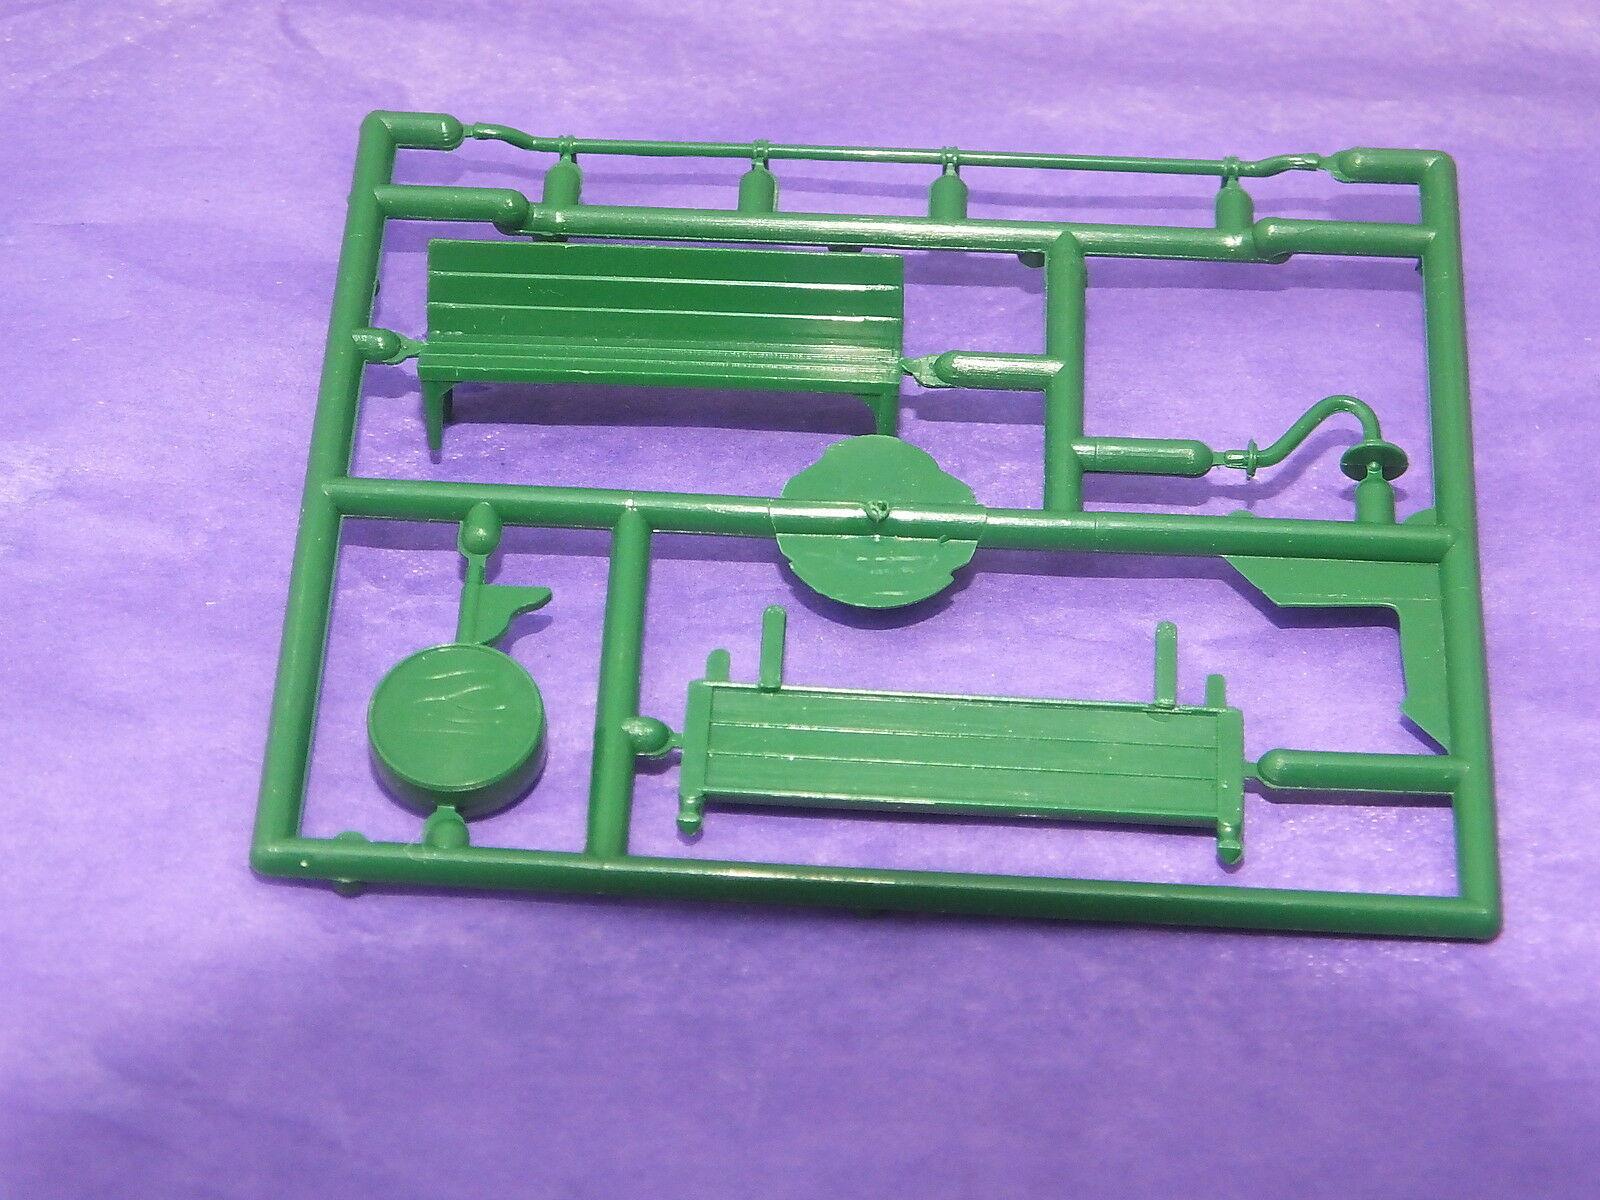 S9862 # HORNBY TRIANG STATION FITTINGS FRET SEAT/CLOCK/LIGHT/N/BOARD GREEN  P21A